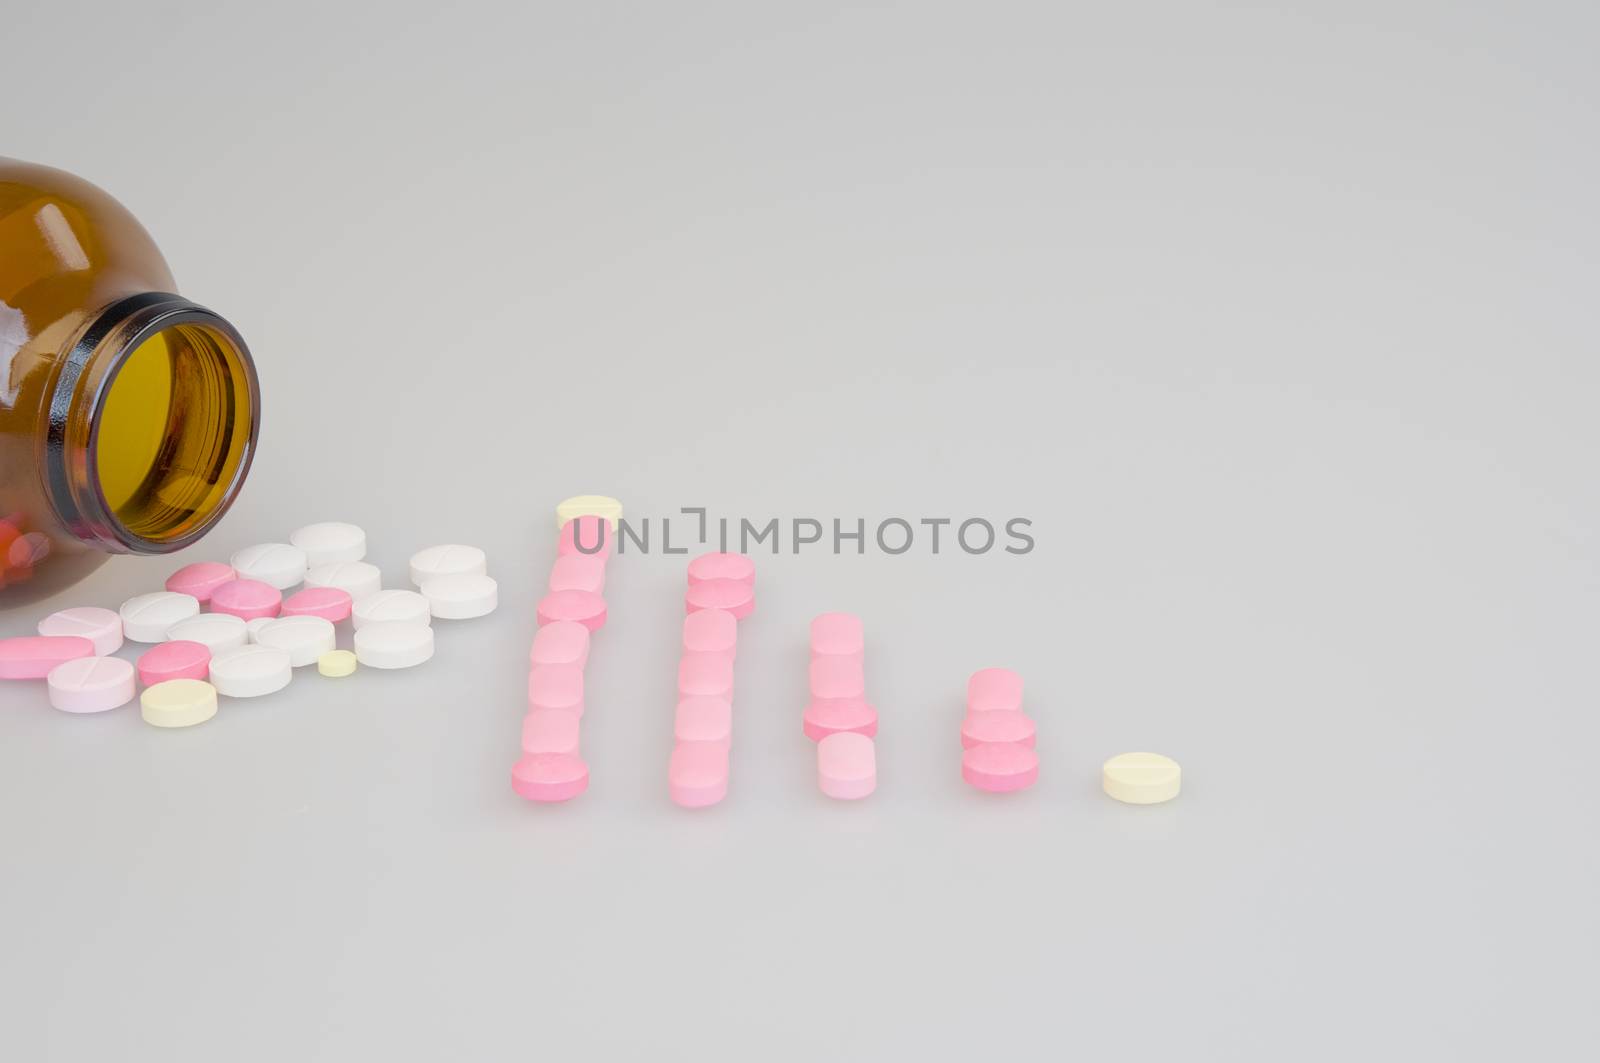 Colorful tablets place as bar graph with white background by eaglesky